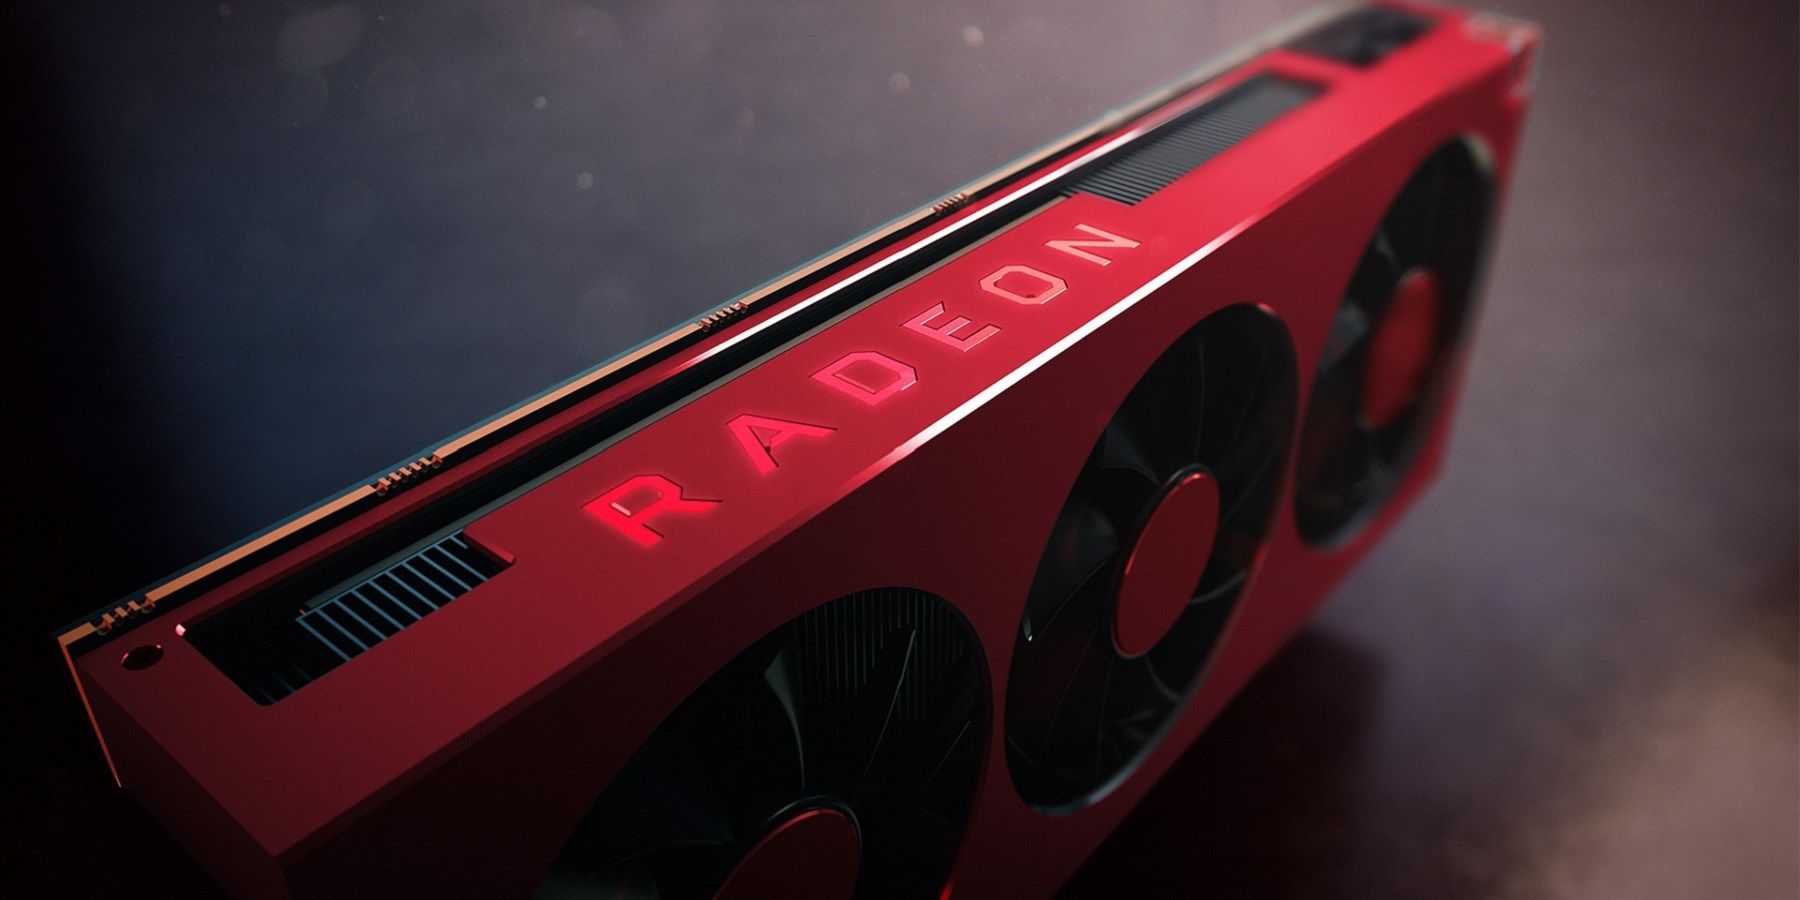 Photo of a red AMD Radeon graphics card.